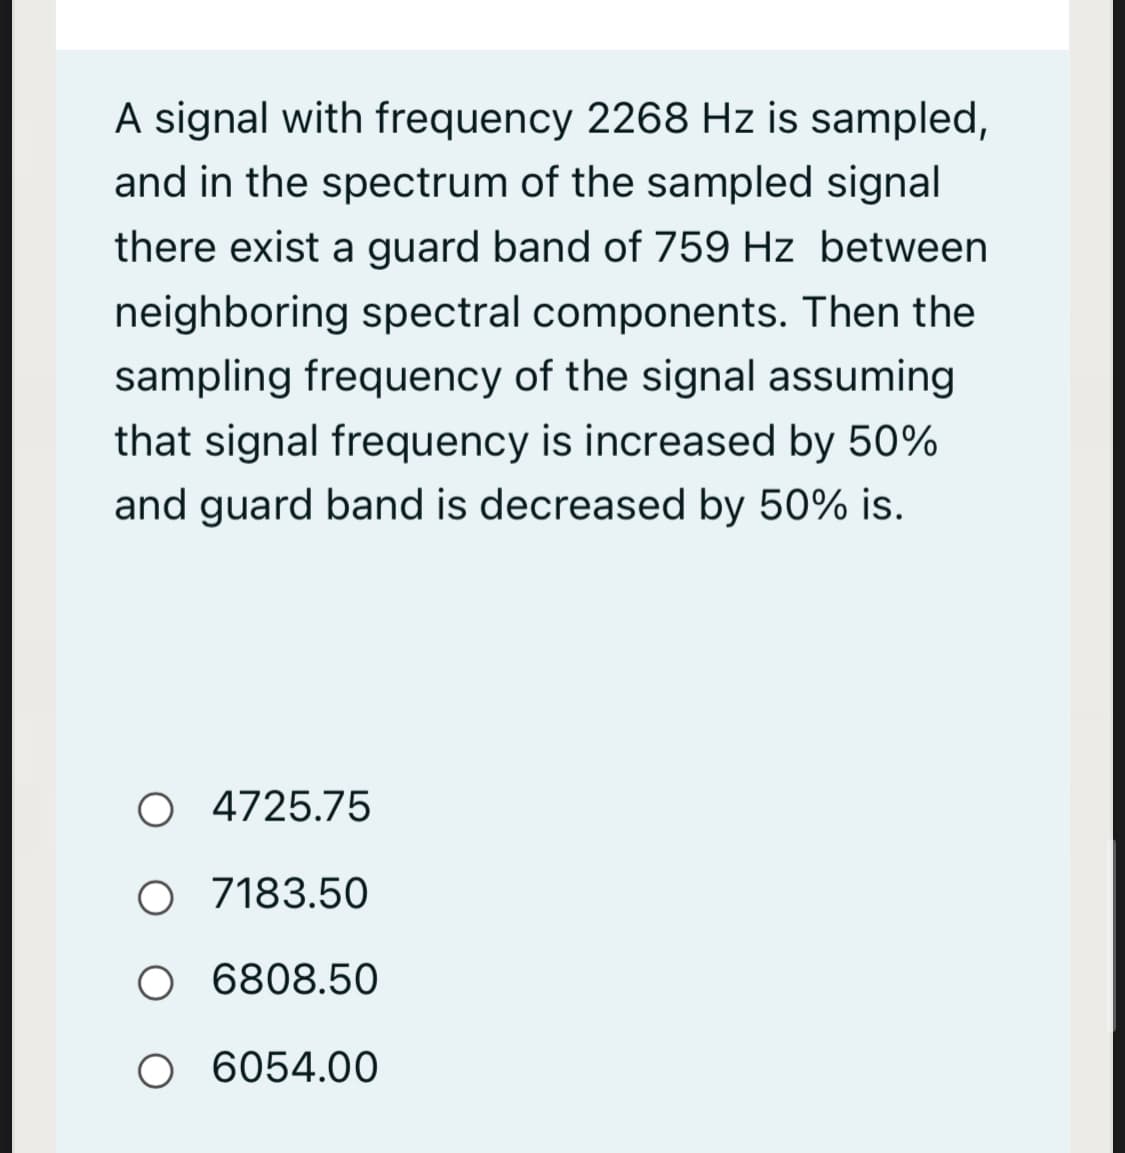 A signal with frequency 2268 Hz is sampled,
and in the spectrum of the sampled signal
there exist a guard band of 759 Hz between
neighboring spectral components. Then the
sampling frequency of the signal assuming
that signal frequency is increased by 50%
and guard band is decreased by 50% is.
O 4725.75
O 7183.50
O 6808.50
O 6054.00
